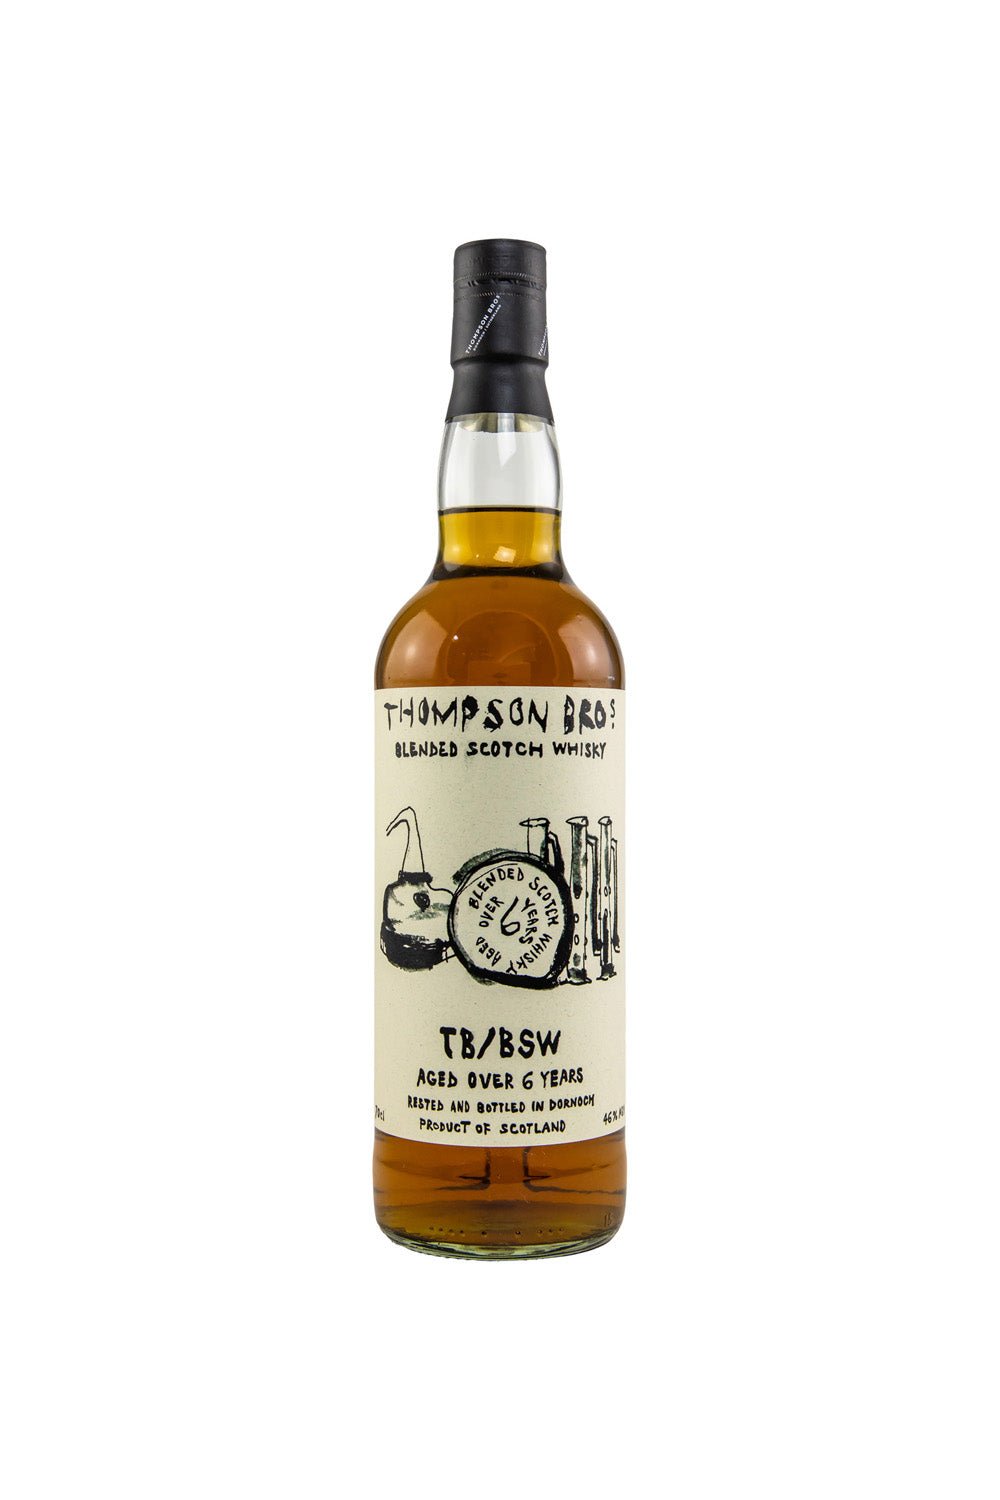 TB/BSW aged over 6 years Blended Scotch Whisky Thompson Bros. 46% vol. 700ml - Maltimore